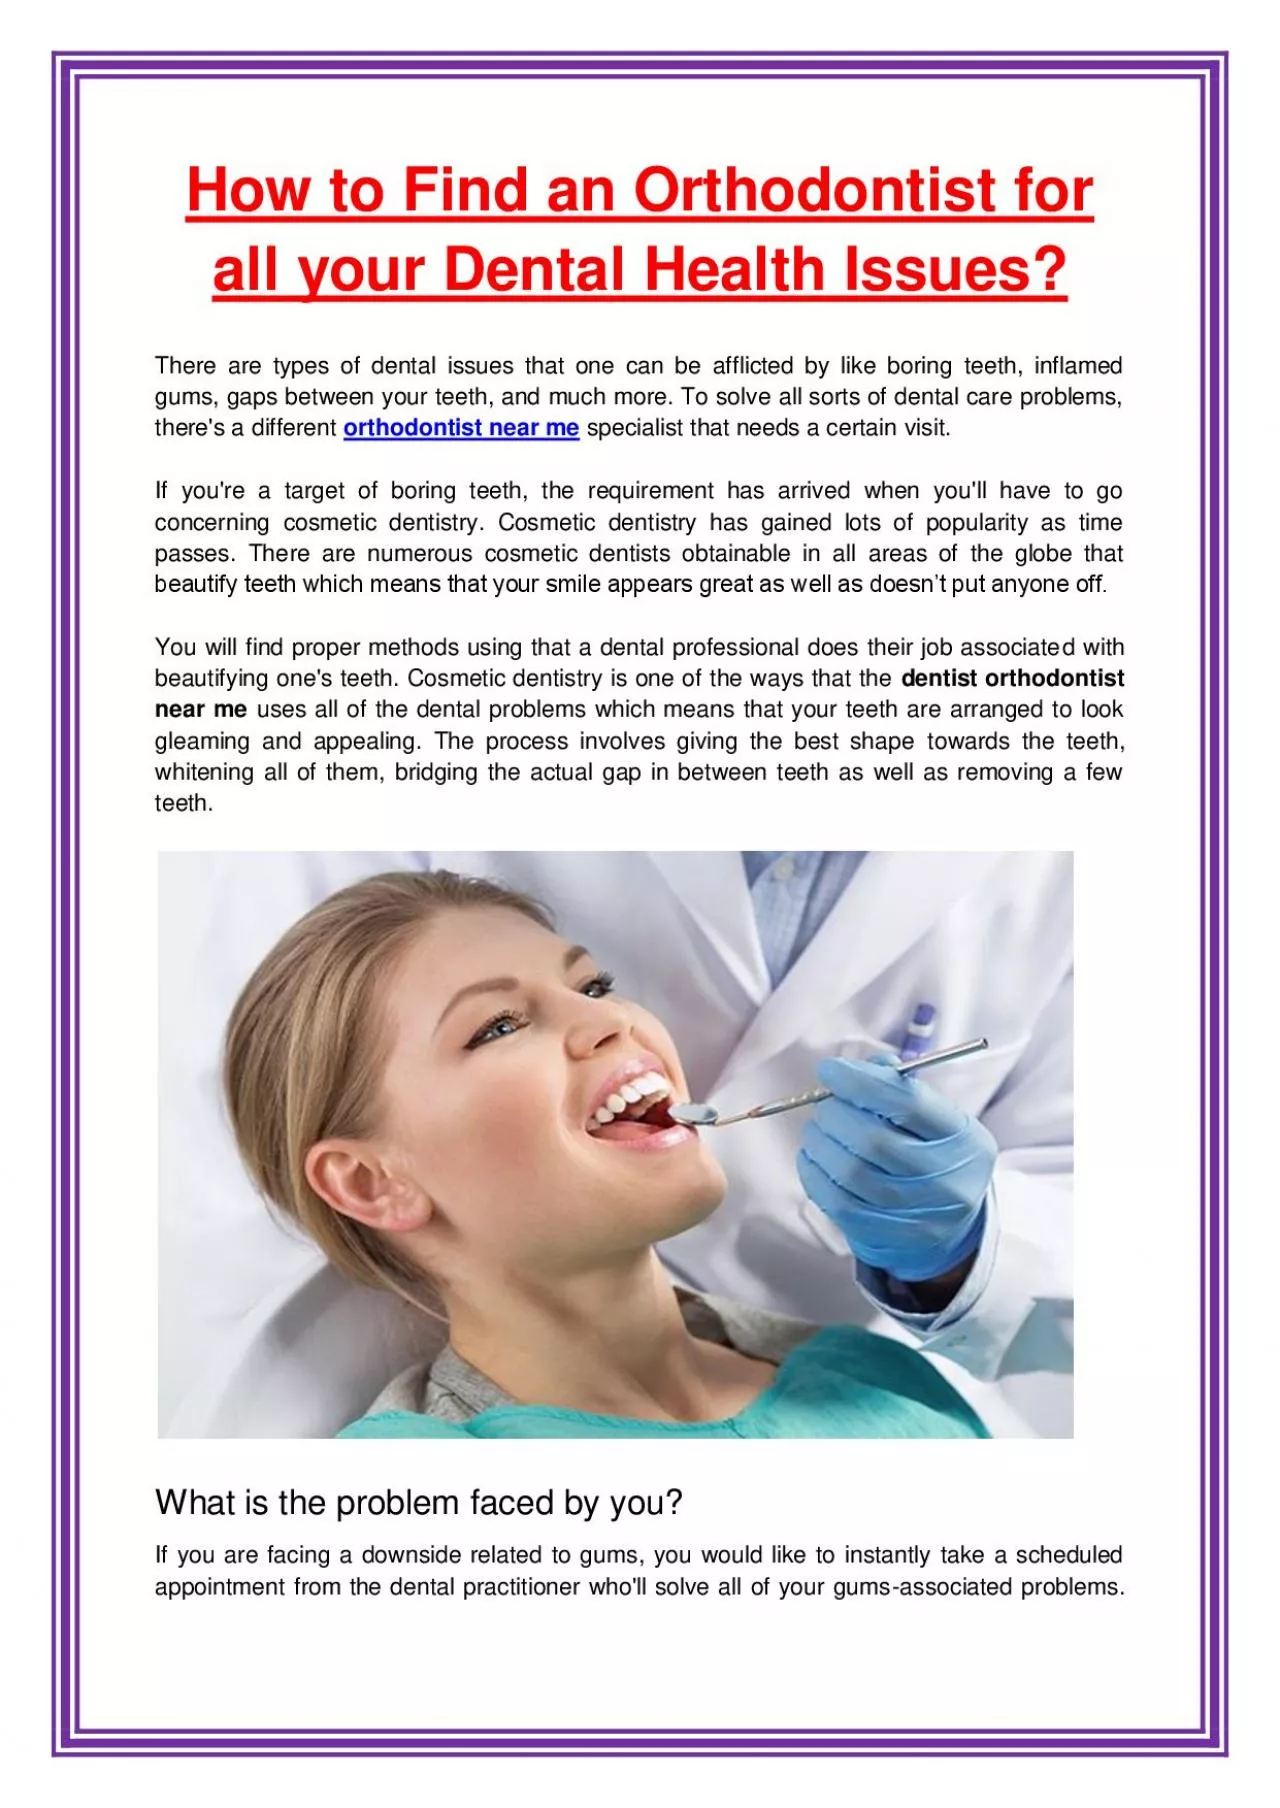 How to Find an Orthodontist for all your Dental Health Issues?